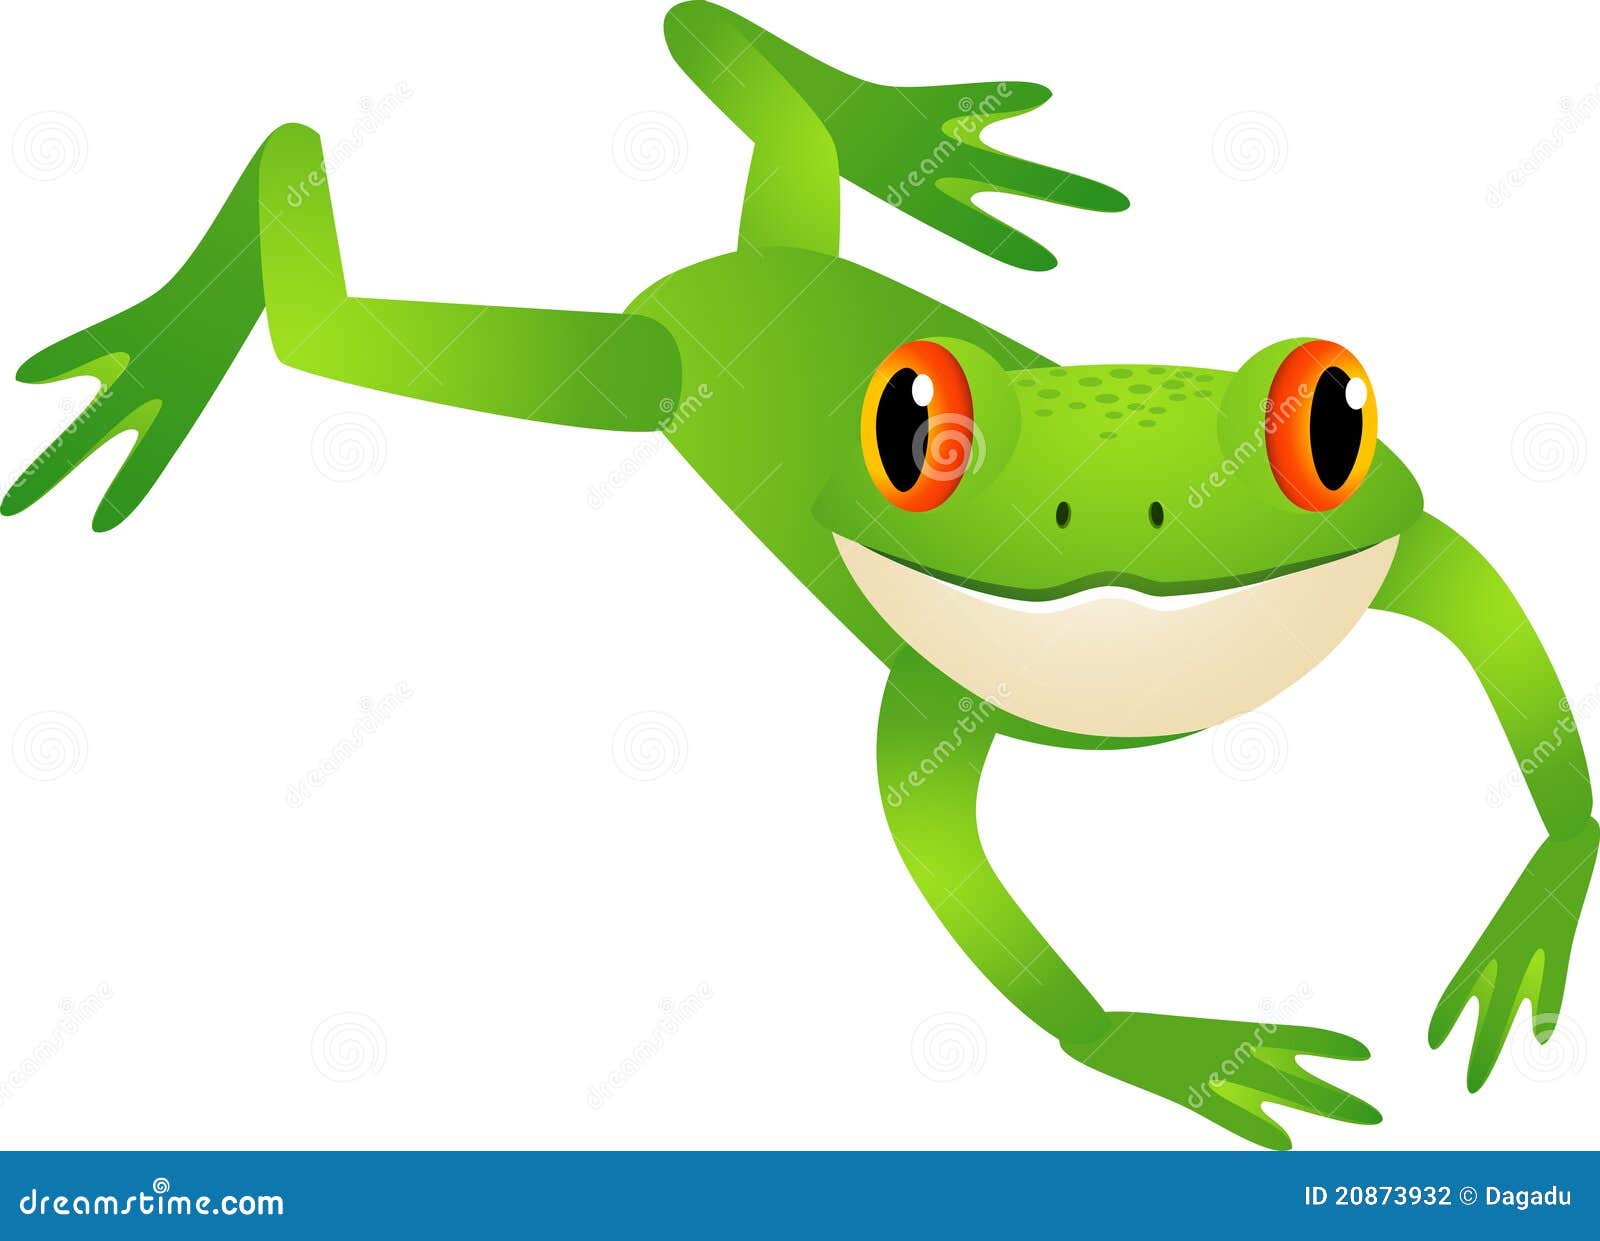 jumping frog clipart - photo #28